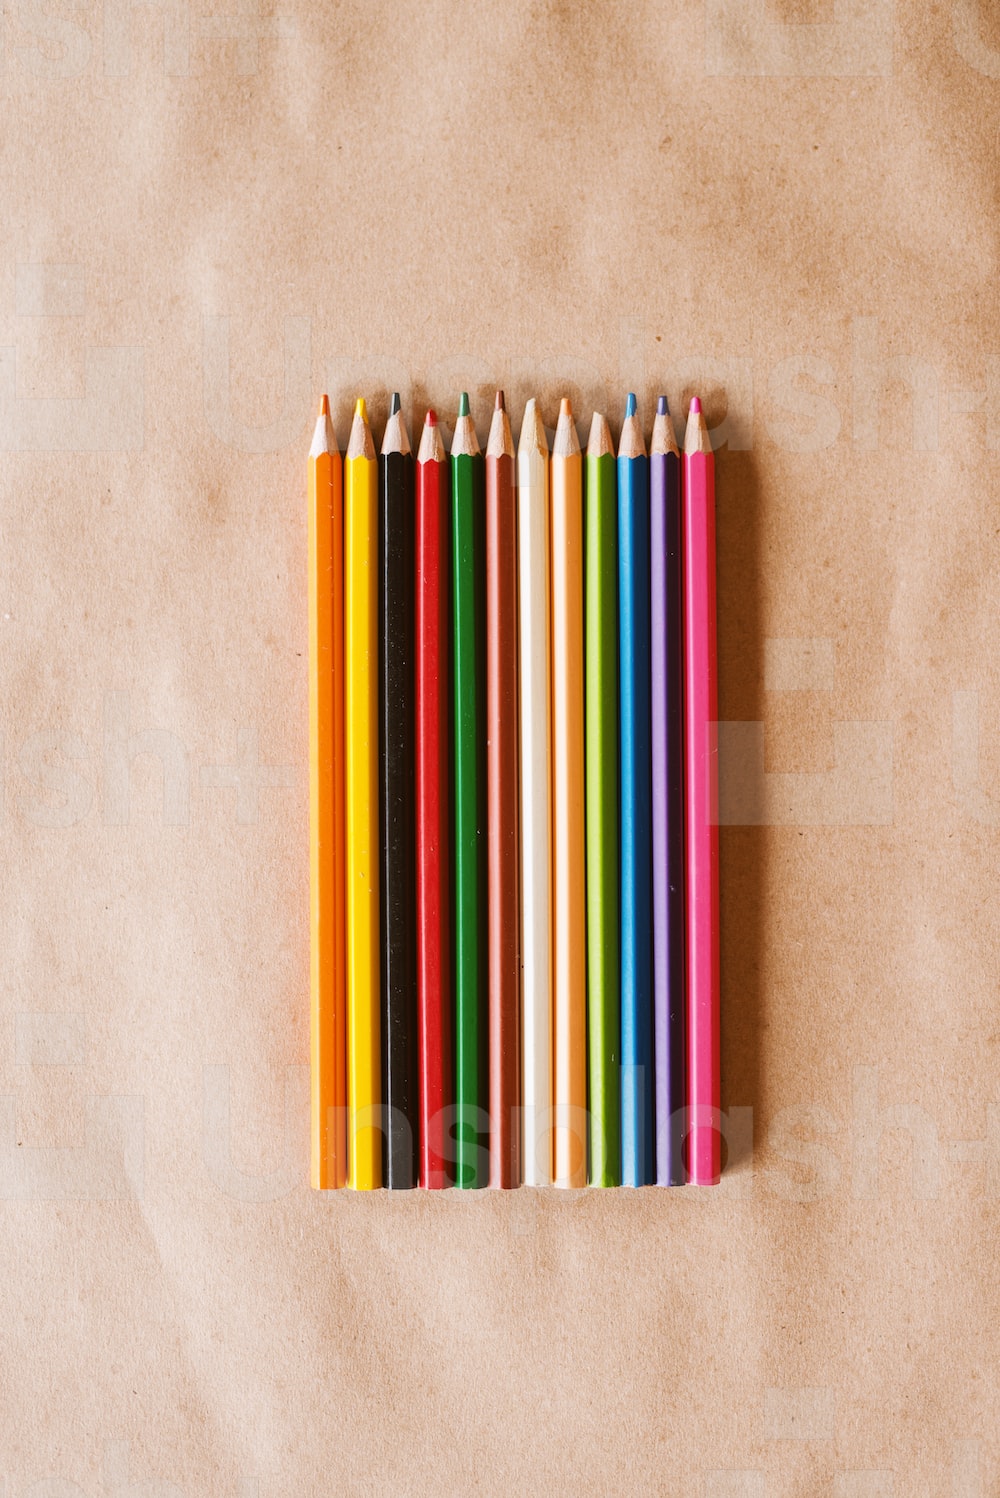 Pencil Wallpapers